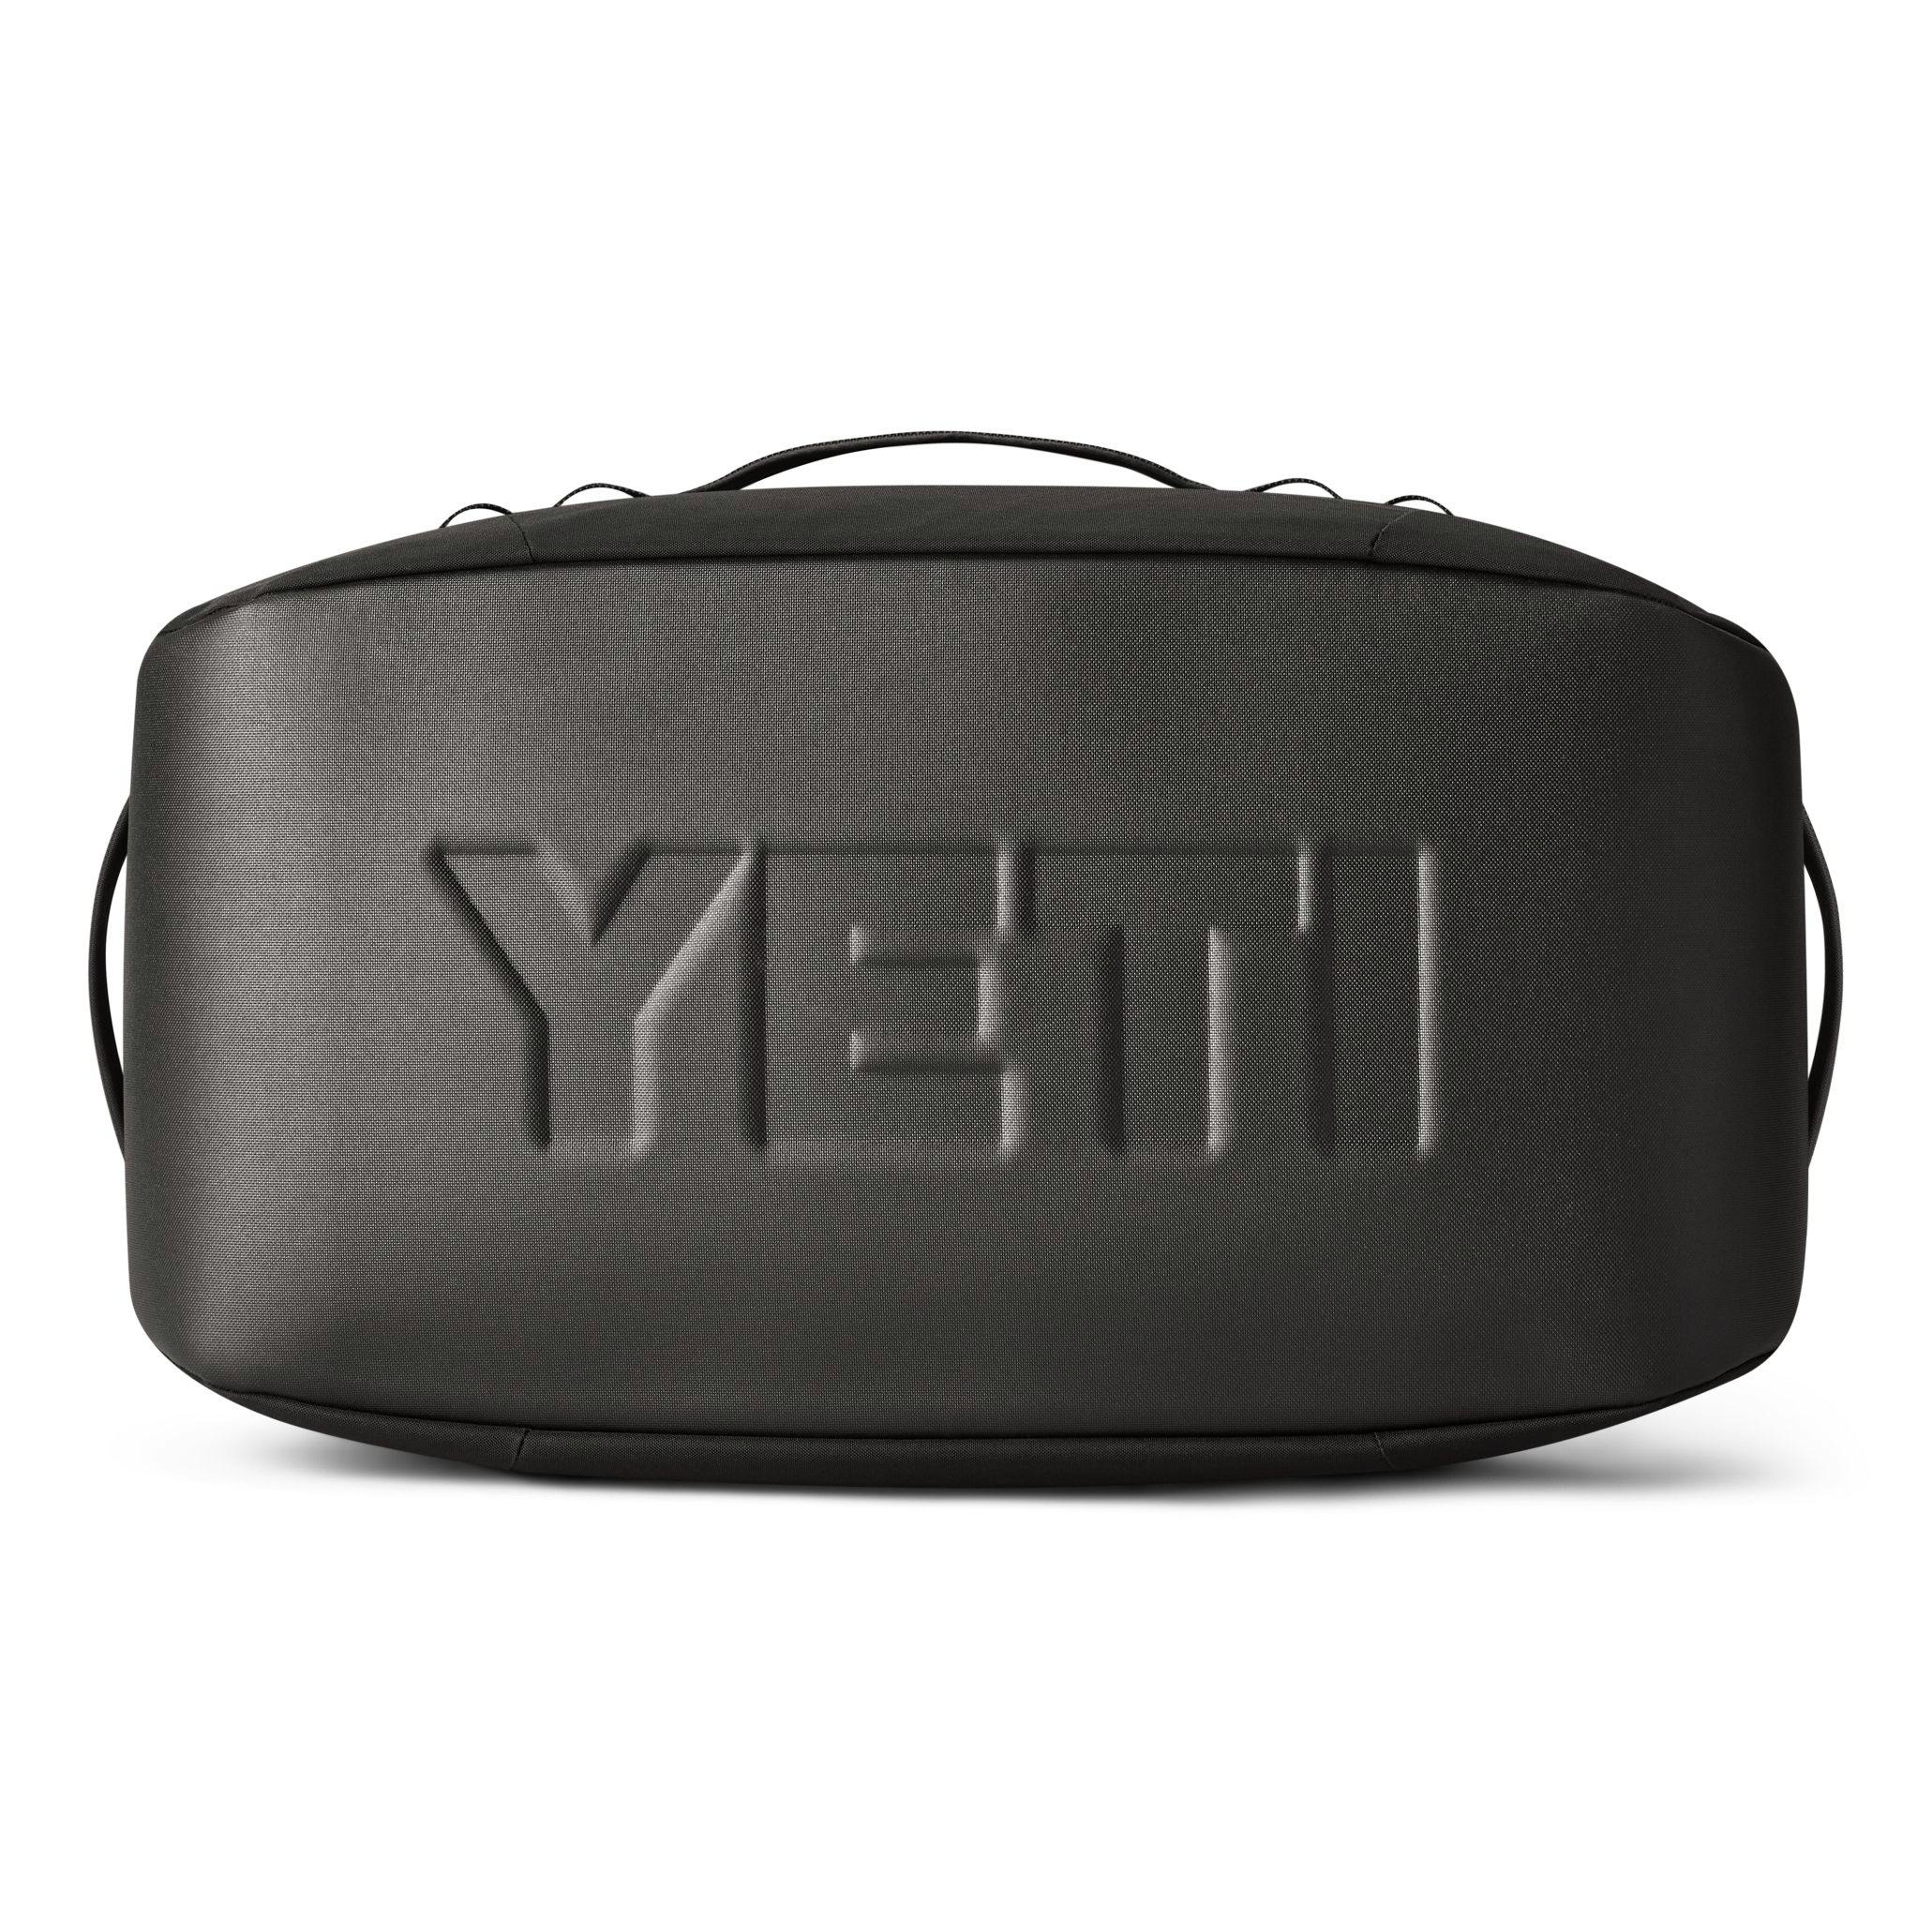 Yeti Just Made an Indestructible Duffel Bag and it's Awesome